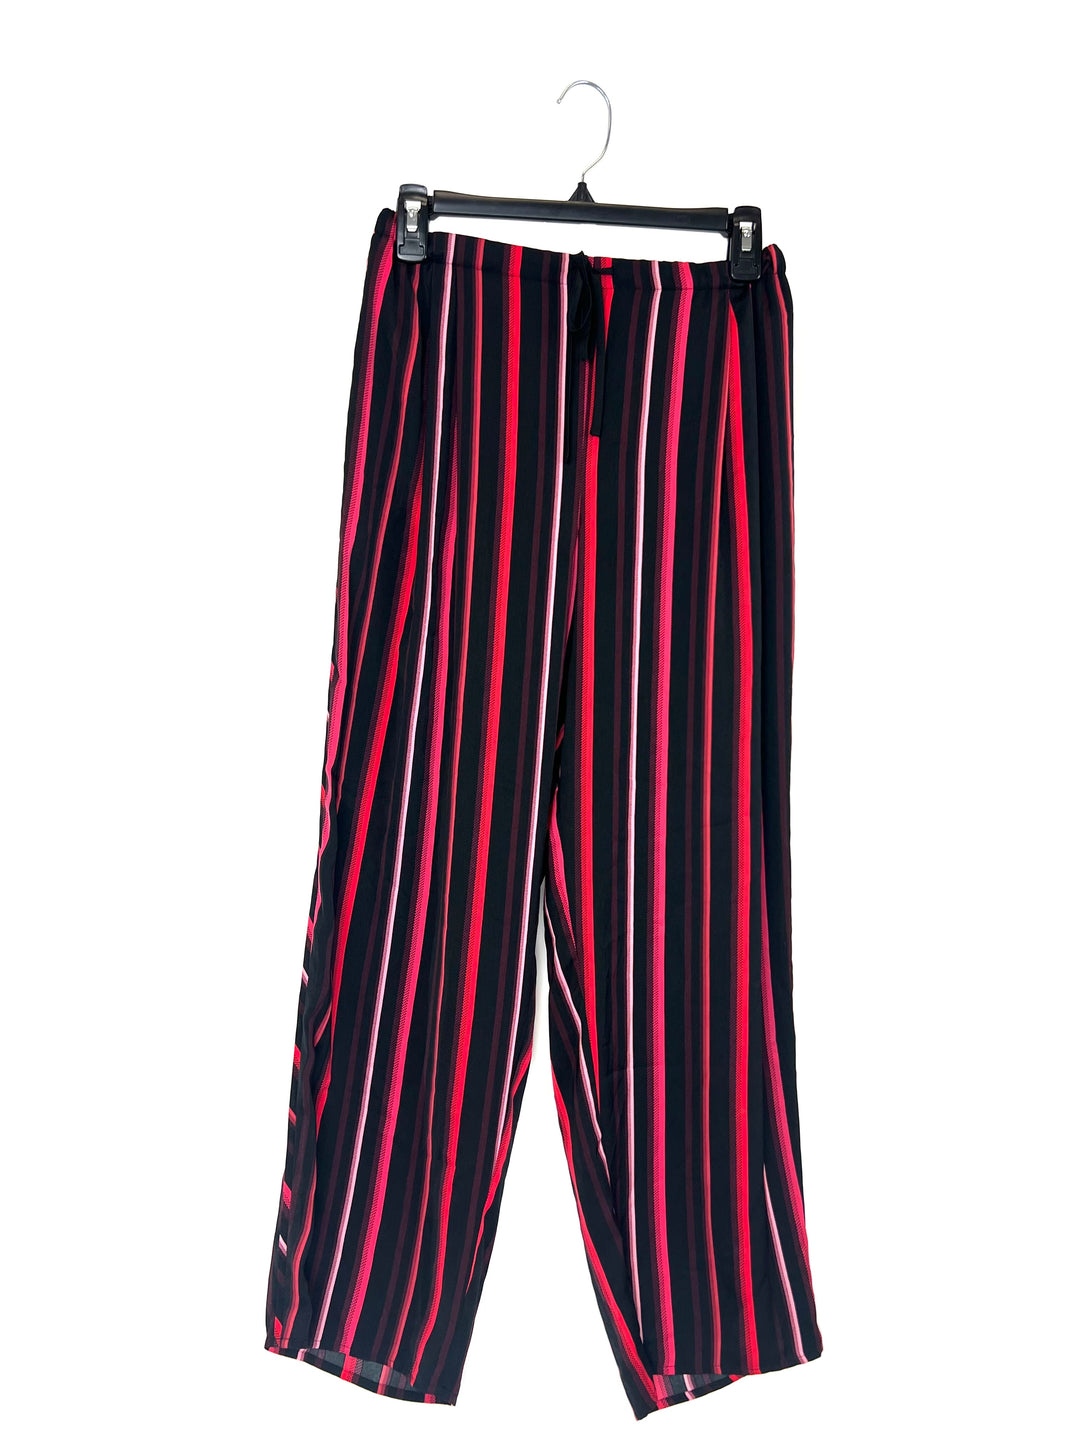 Red and Black Striped Pant Sleep Set- Small